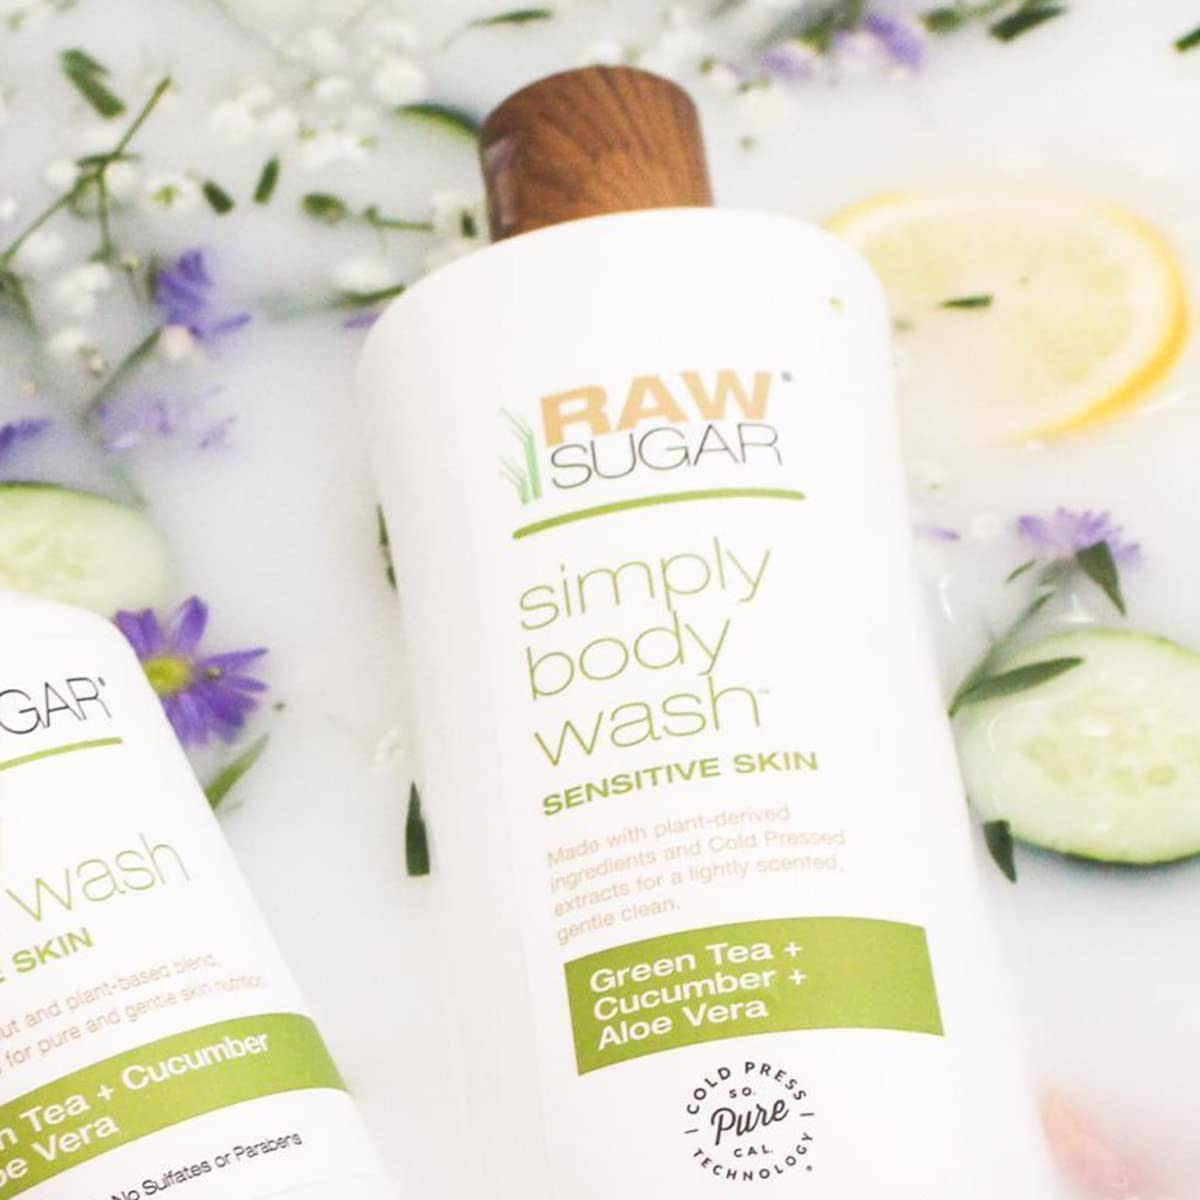 RAW SUGAR Simply Body Wash for Sensitive Skin - Moisturizing, Nutrient-Rich Gentle Bath & Shower Gel, Formulated without Sulfates and Parabens & Vegan (Pack of 3)